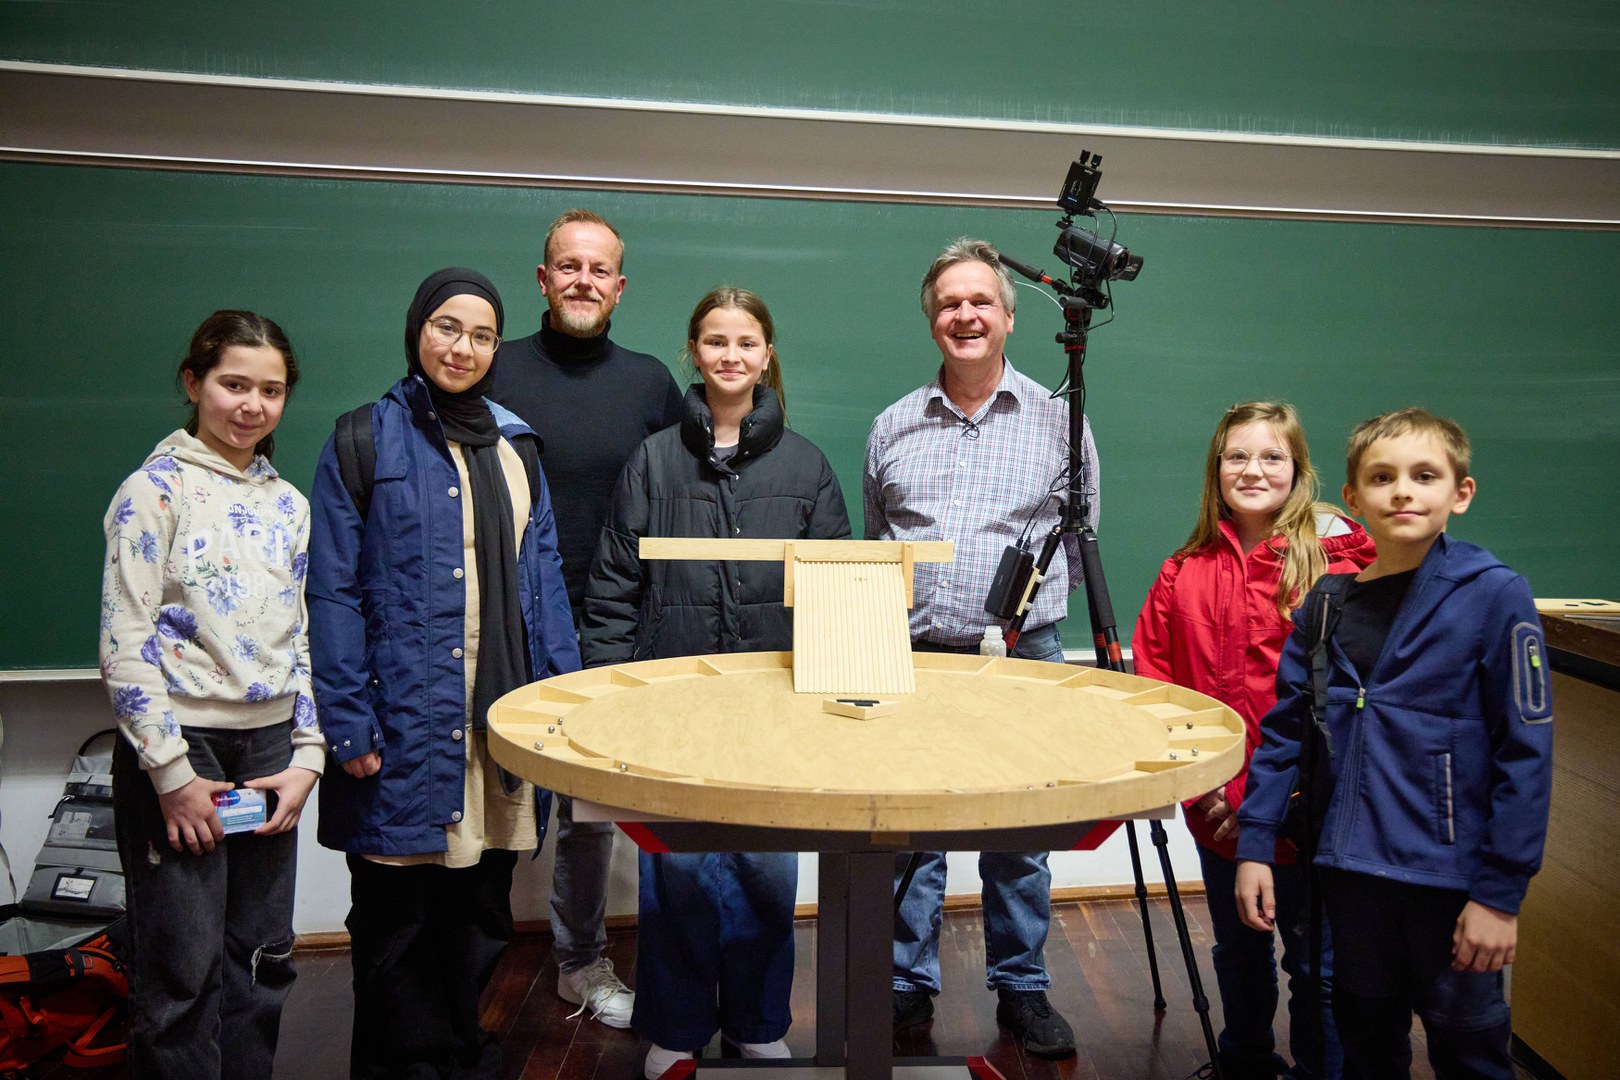 Prof. Desch with pupils and a teacher from the Tannenbusch Gymnasium, a school cooperating with the University of Bonn.